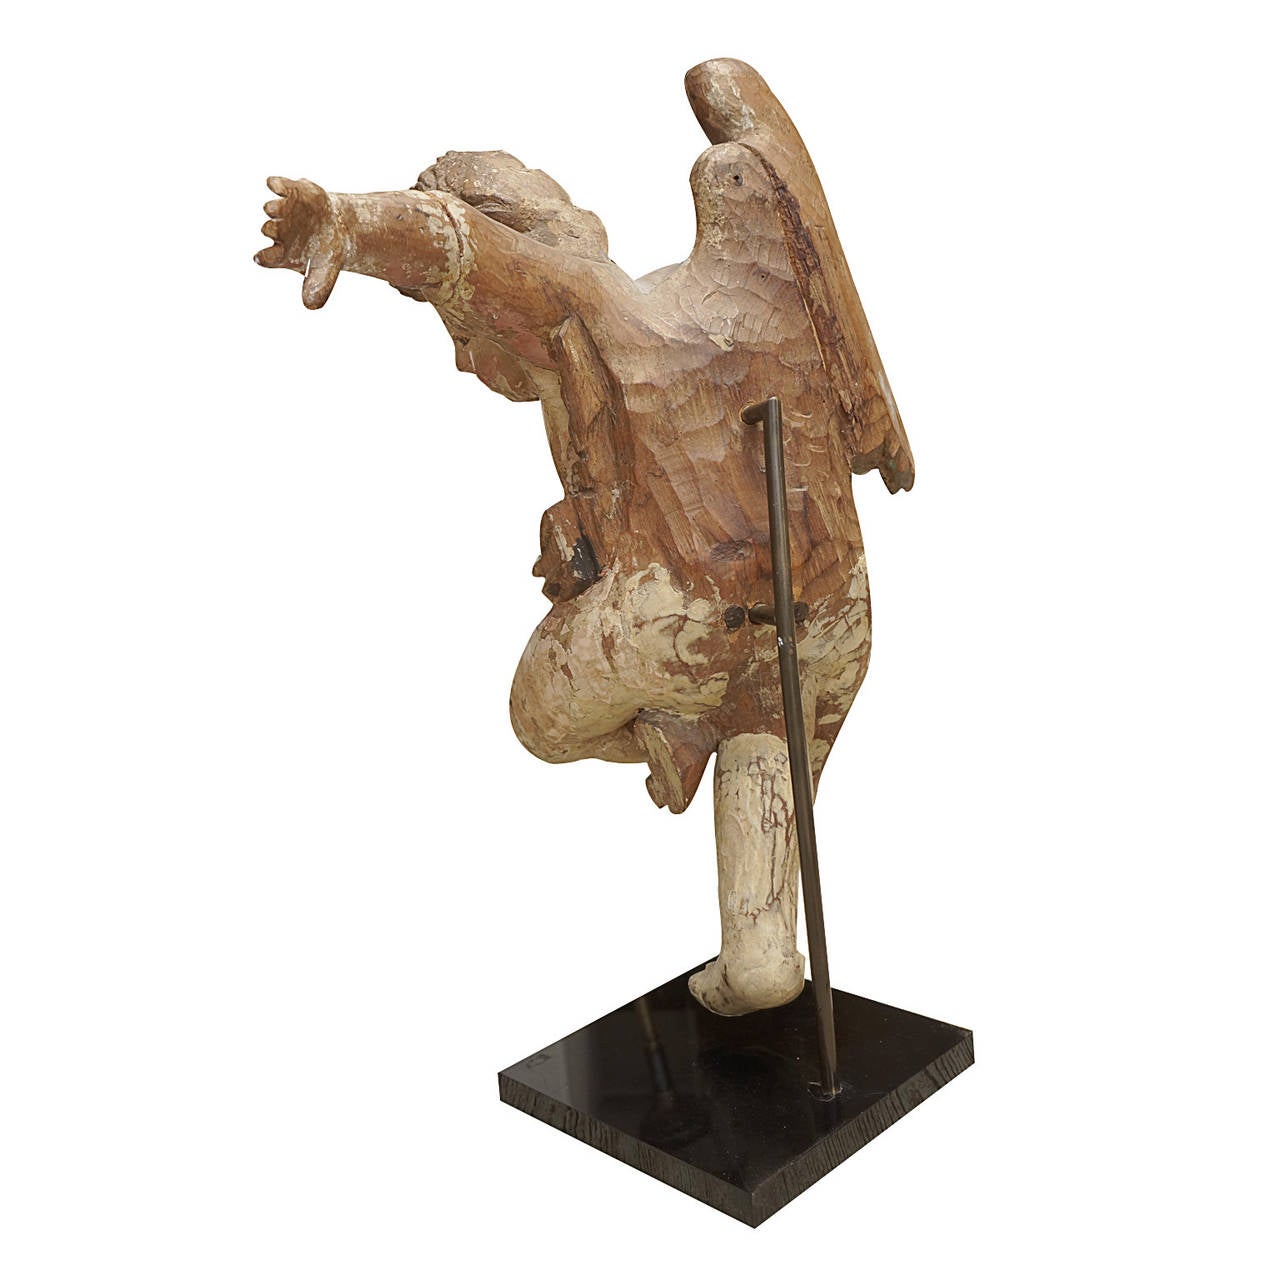 17th Century Italian wooden angel, exceptionally hand-carved to show a flow of motion. It is attached to a stand and is missing a wing as well as an arm. The surface is multi-colored paint on wood.